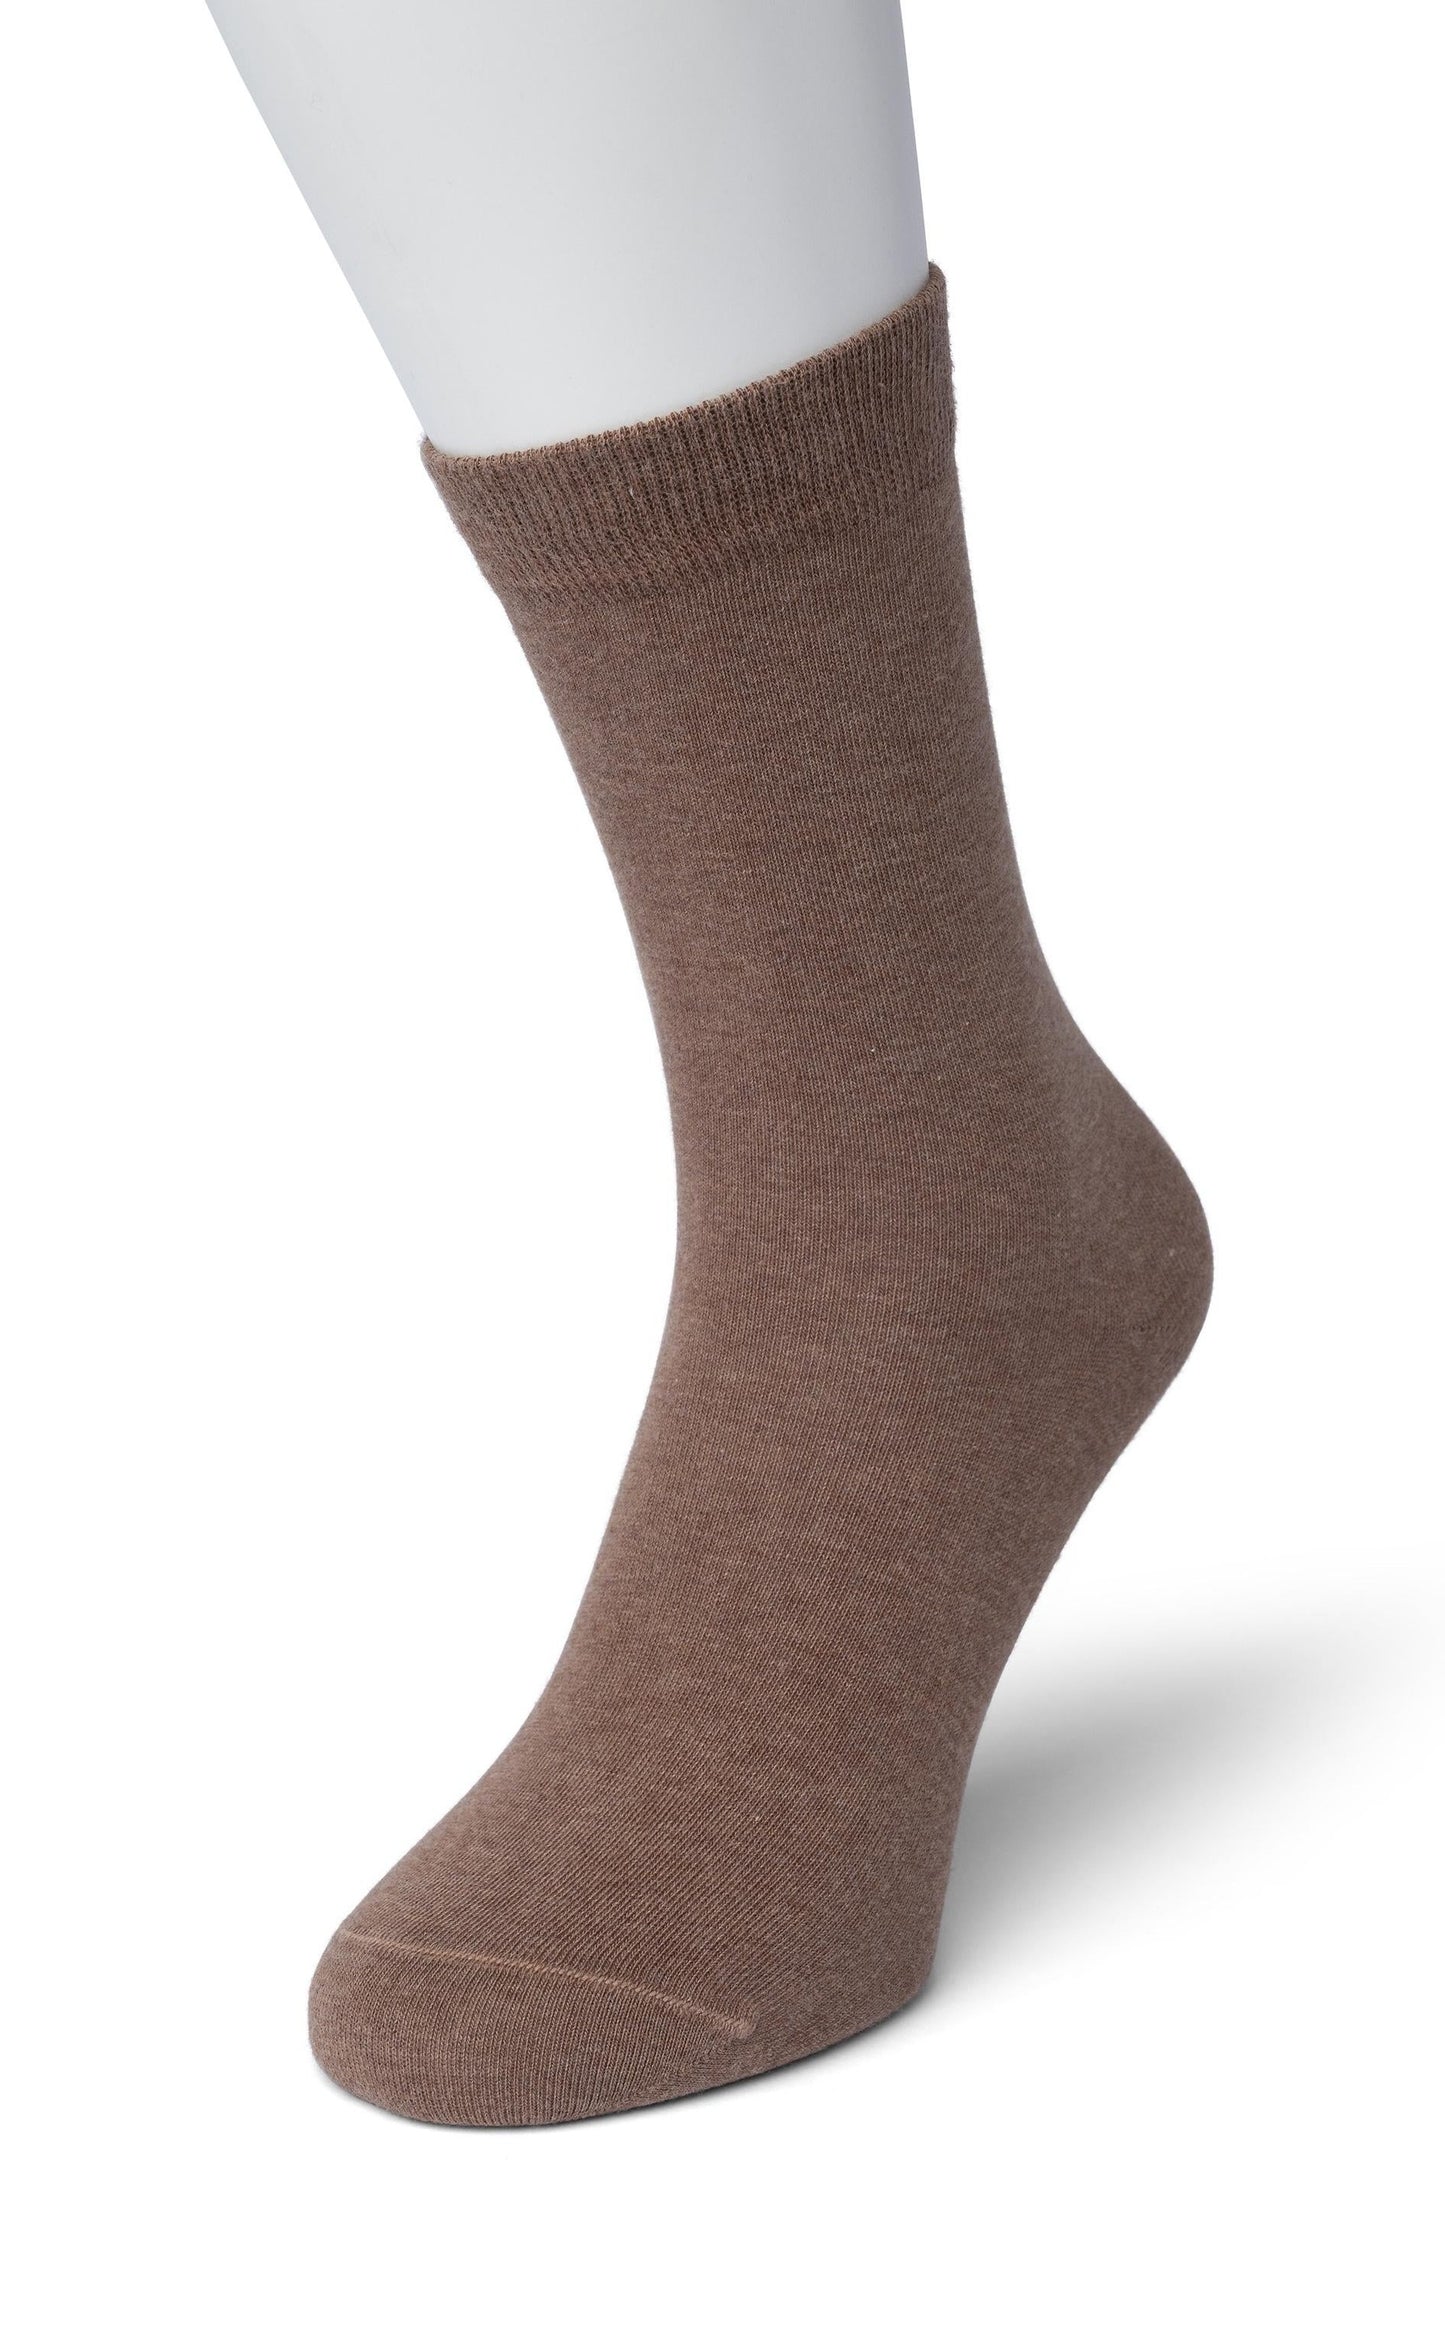 Bonnie Doon 83422 / BD632401 Cotton Sock - Light Brown/Hazelnut ankle socks available in men and women sizes